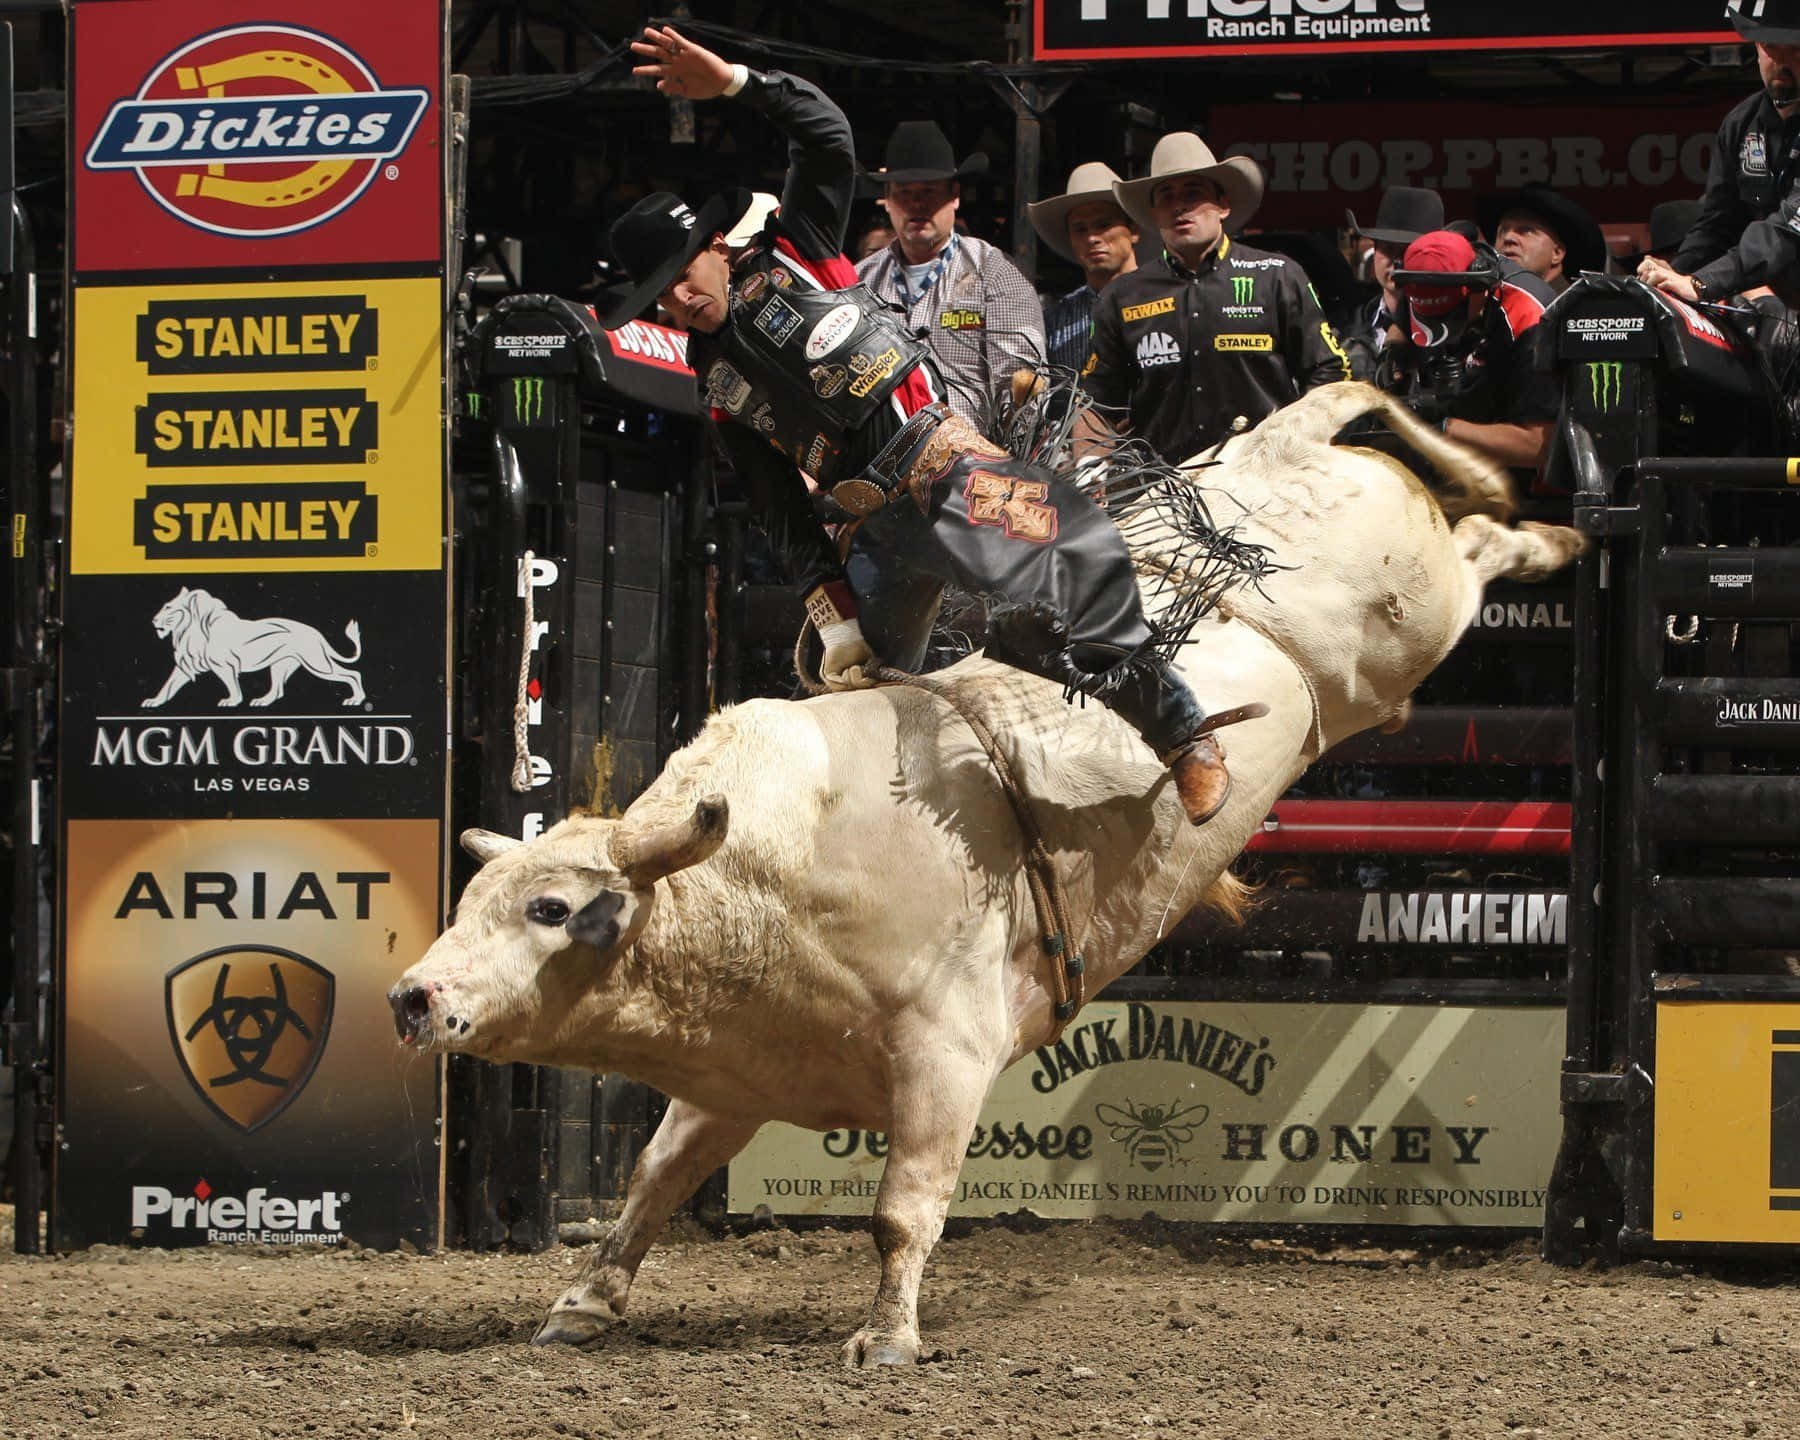 Cowboy tames a bull during a rodeo.